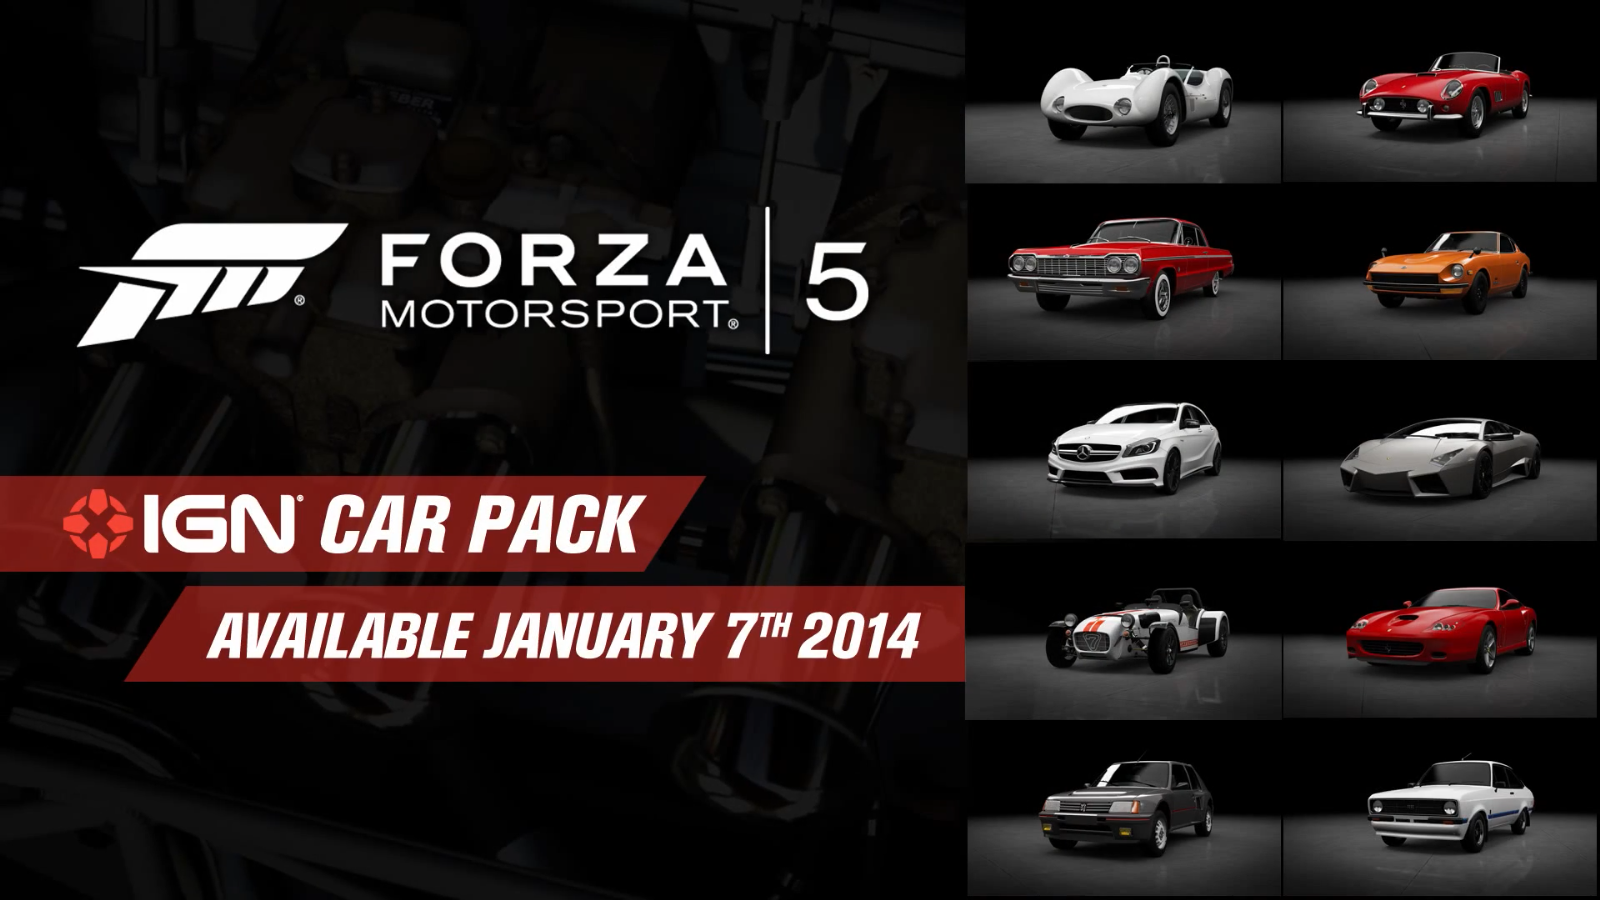 Forza Motorsport Video Review - IGN